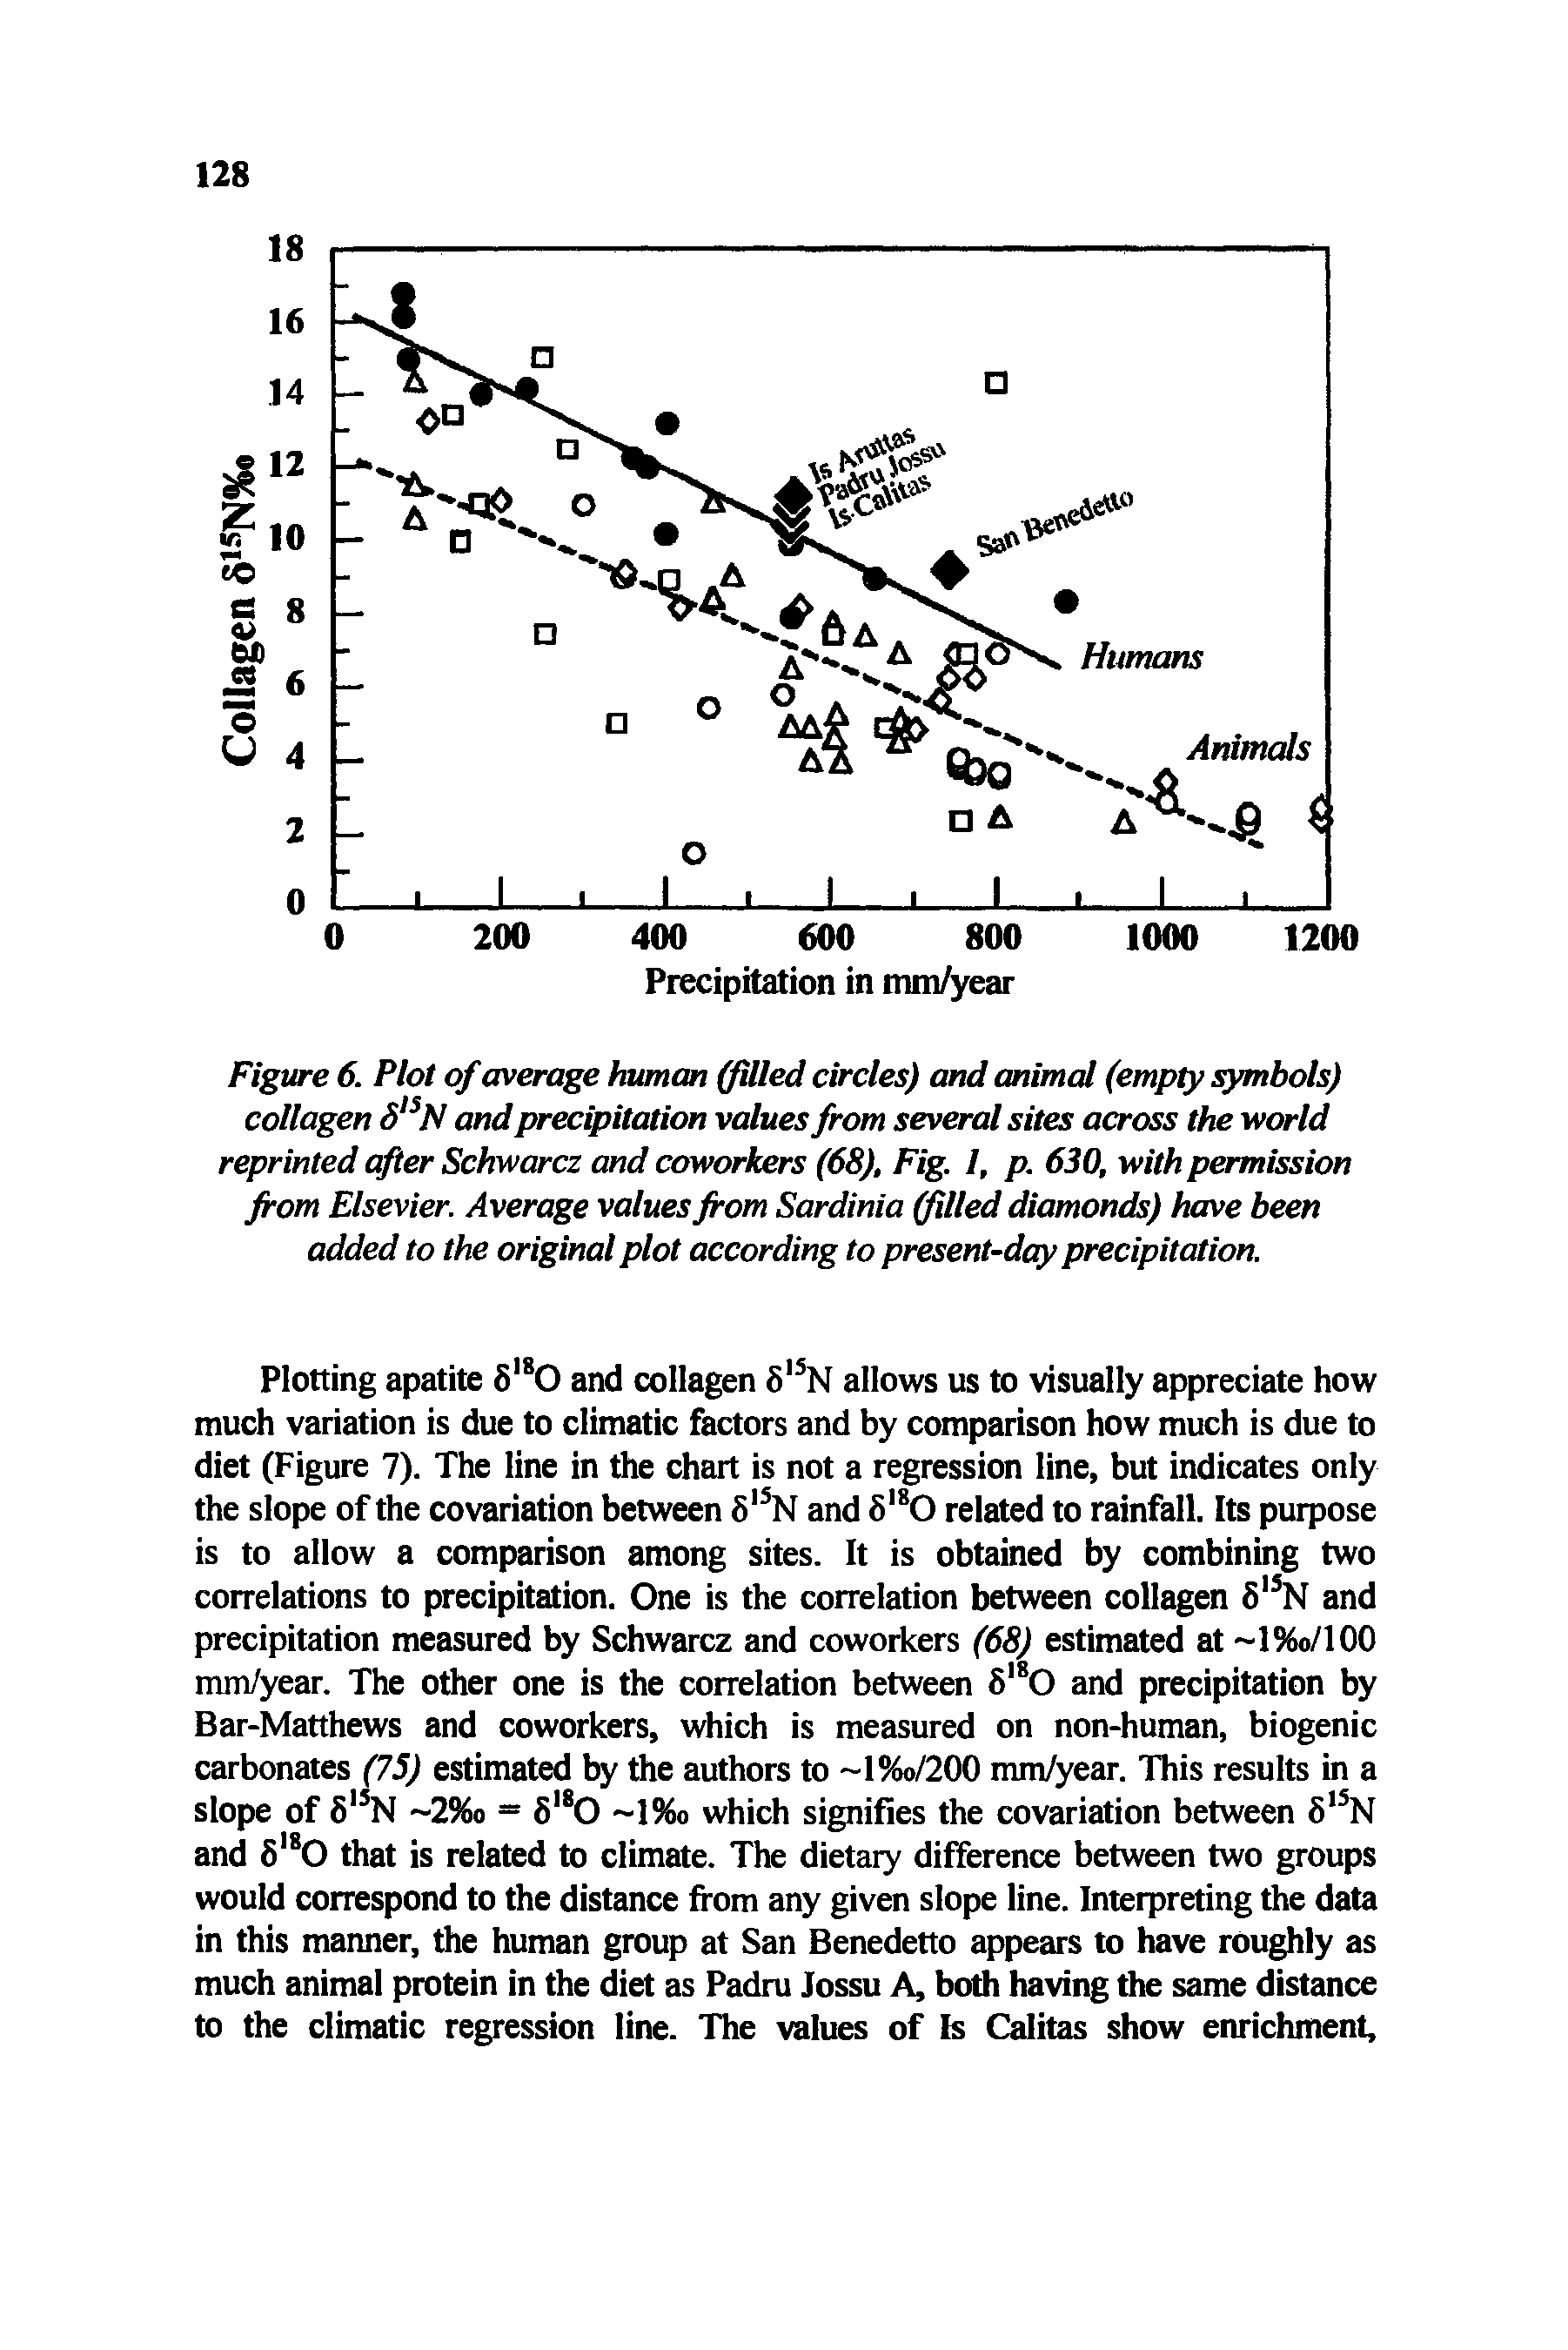 Figure 6. Plot of average human (filled circles) and animal (empty symbols) collagen SlsN and precipitation values from several sites across the world reprinted after Schwarcz and coworkers (68), Fig. 1, p. 630, with permission from Elsevier. Average values from Sardinia (filled diamonds) have been added to the original plot according to present-day precipitation.